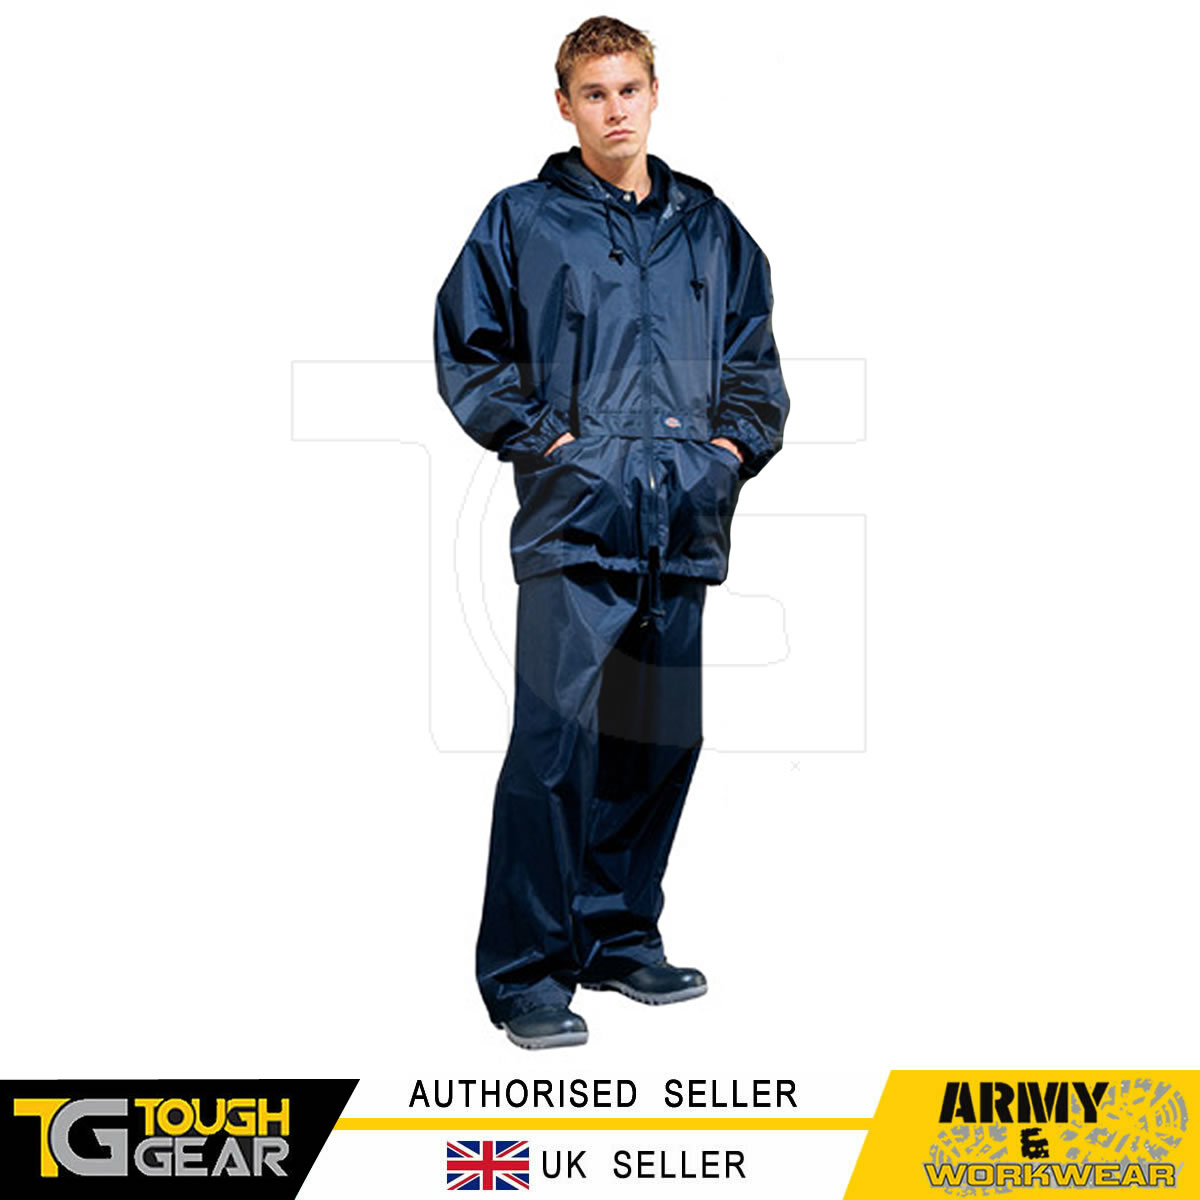 FESTIVAL'DOWNLOAD' NBDS NAVY WEATHERPROOF 2PC RAINSUIT SIZES SMALL to 4XL 